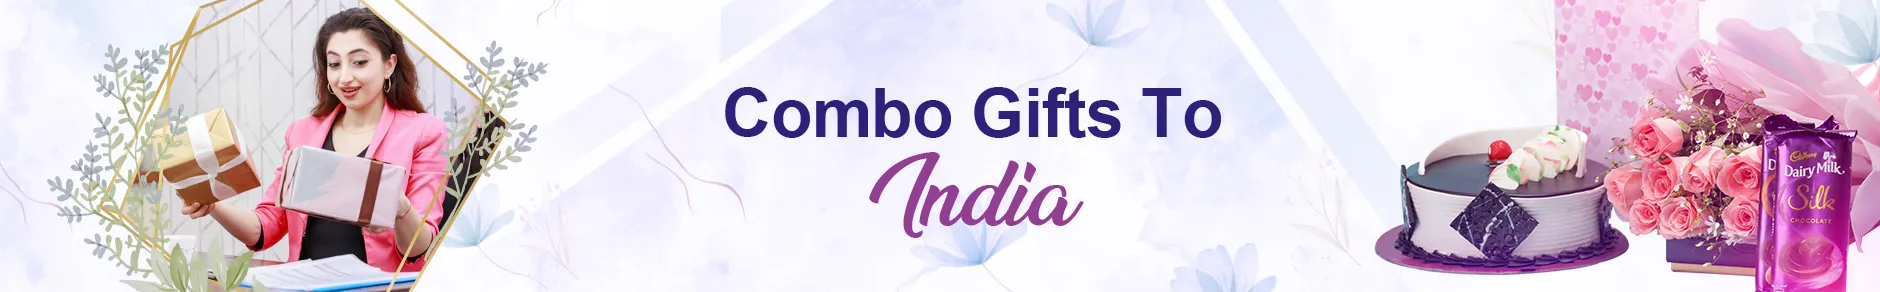 Combo Gifts